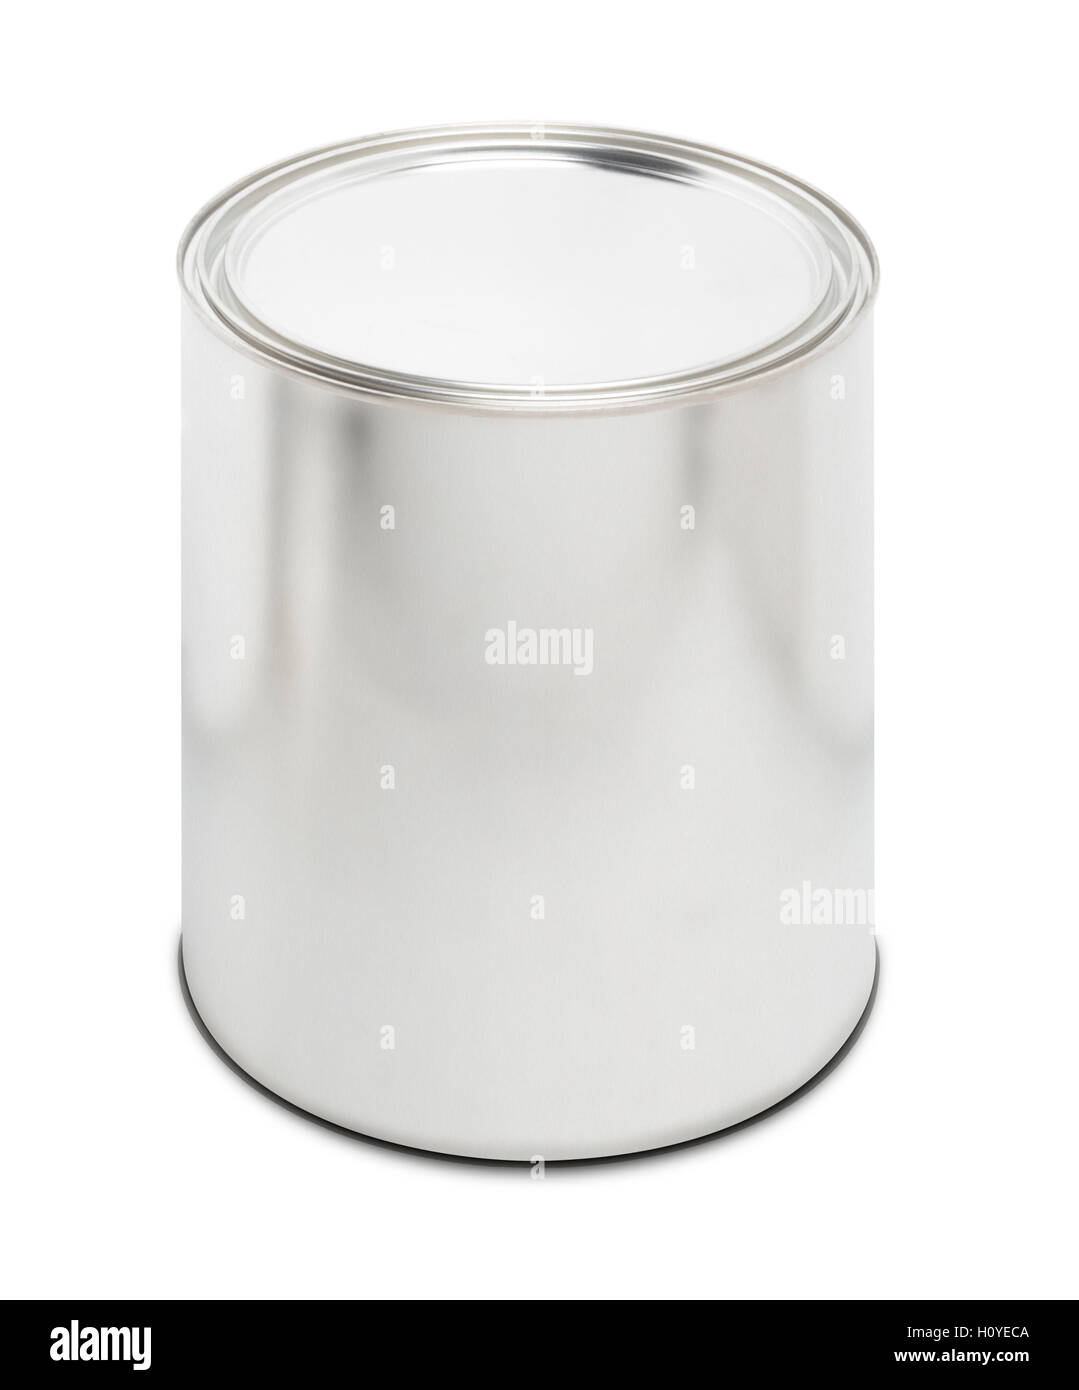 A silver paint can suitable for adding text to Stock Photo